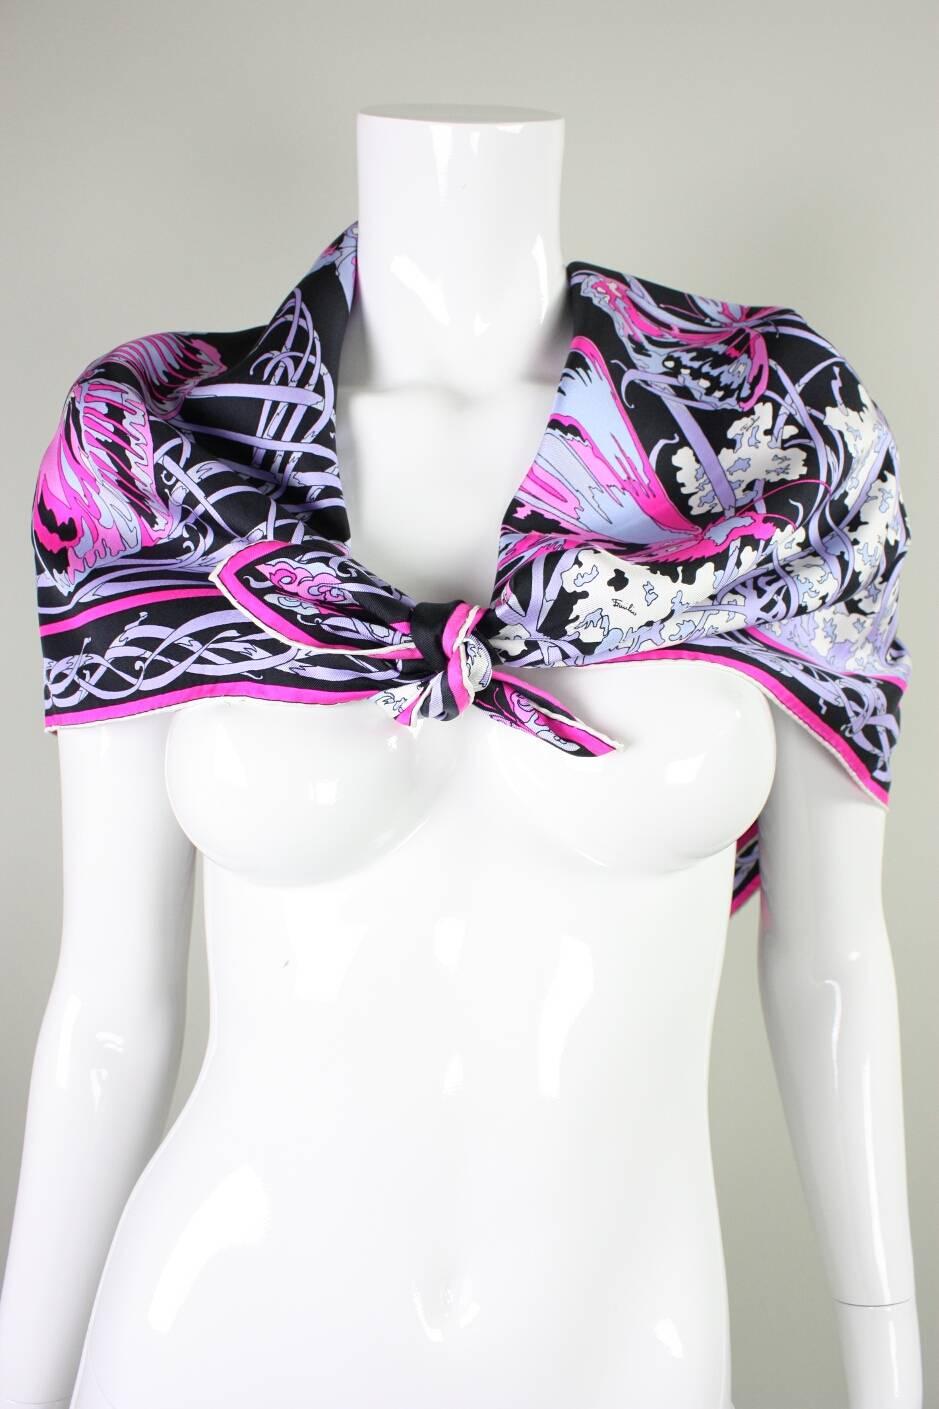 Vintage scarf from Emilio Pucci dates to the 1970’s and is made of silk twill and features a psychedelic butterfly print.  Edges are hand rolled.  Made in Italy.

Condition: Excellent.  Appears to be unworn.
